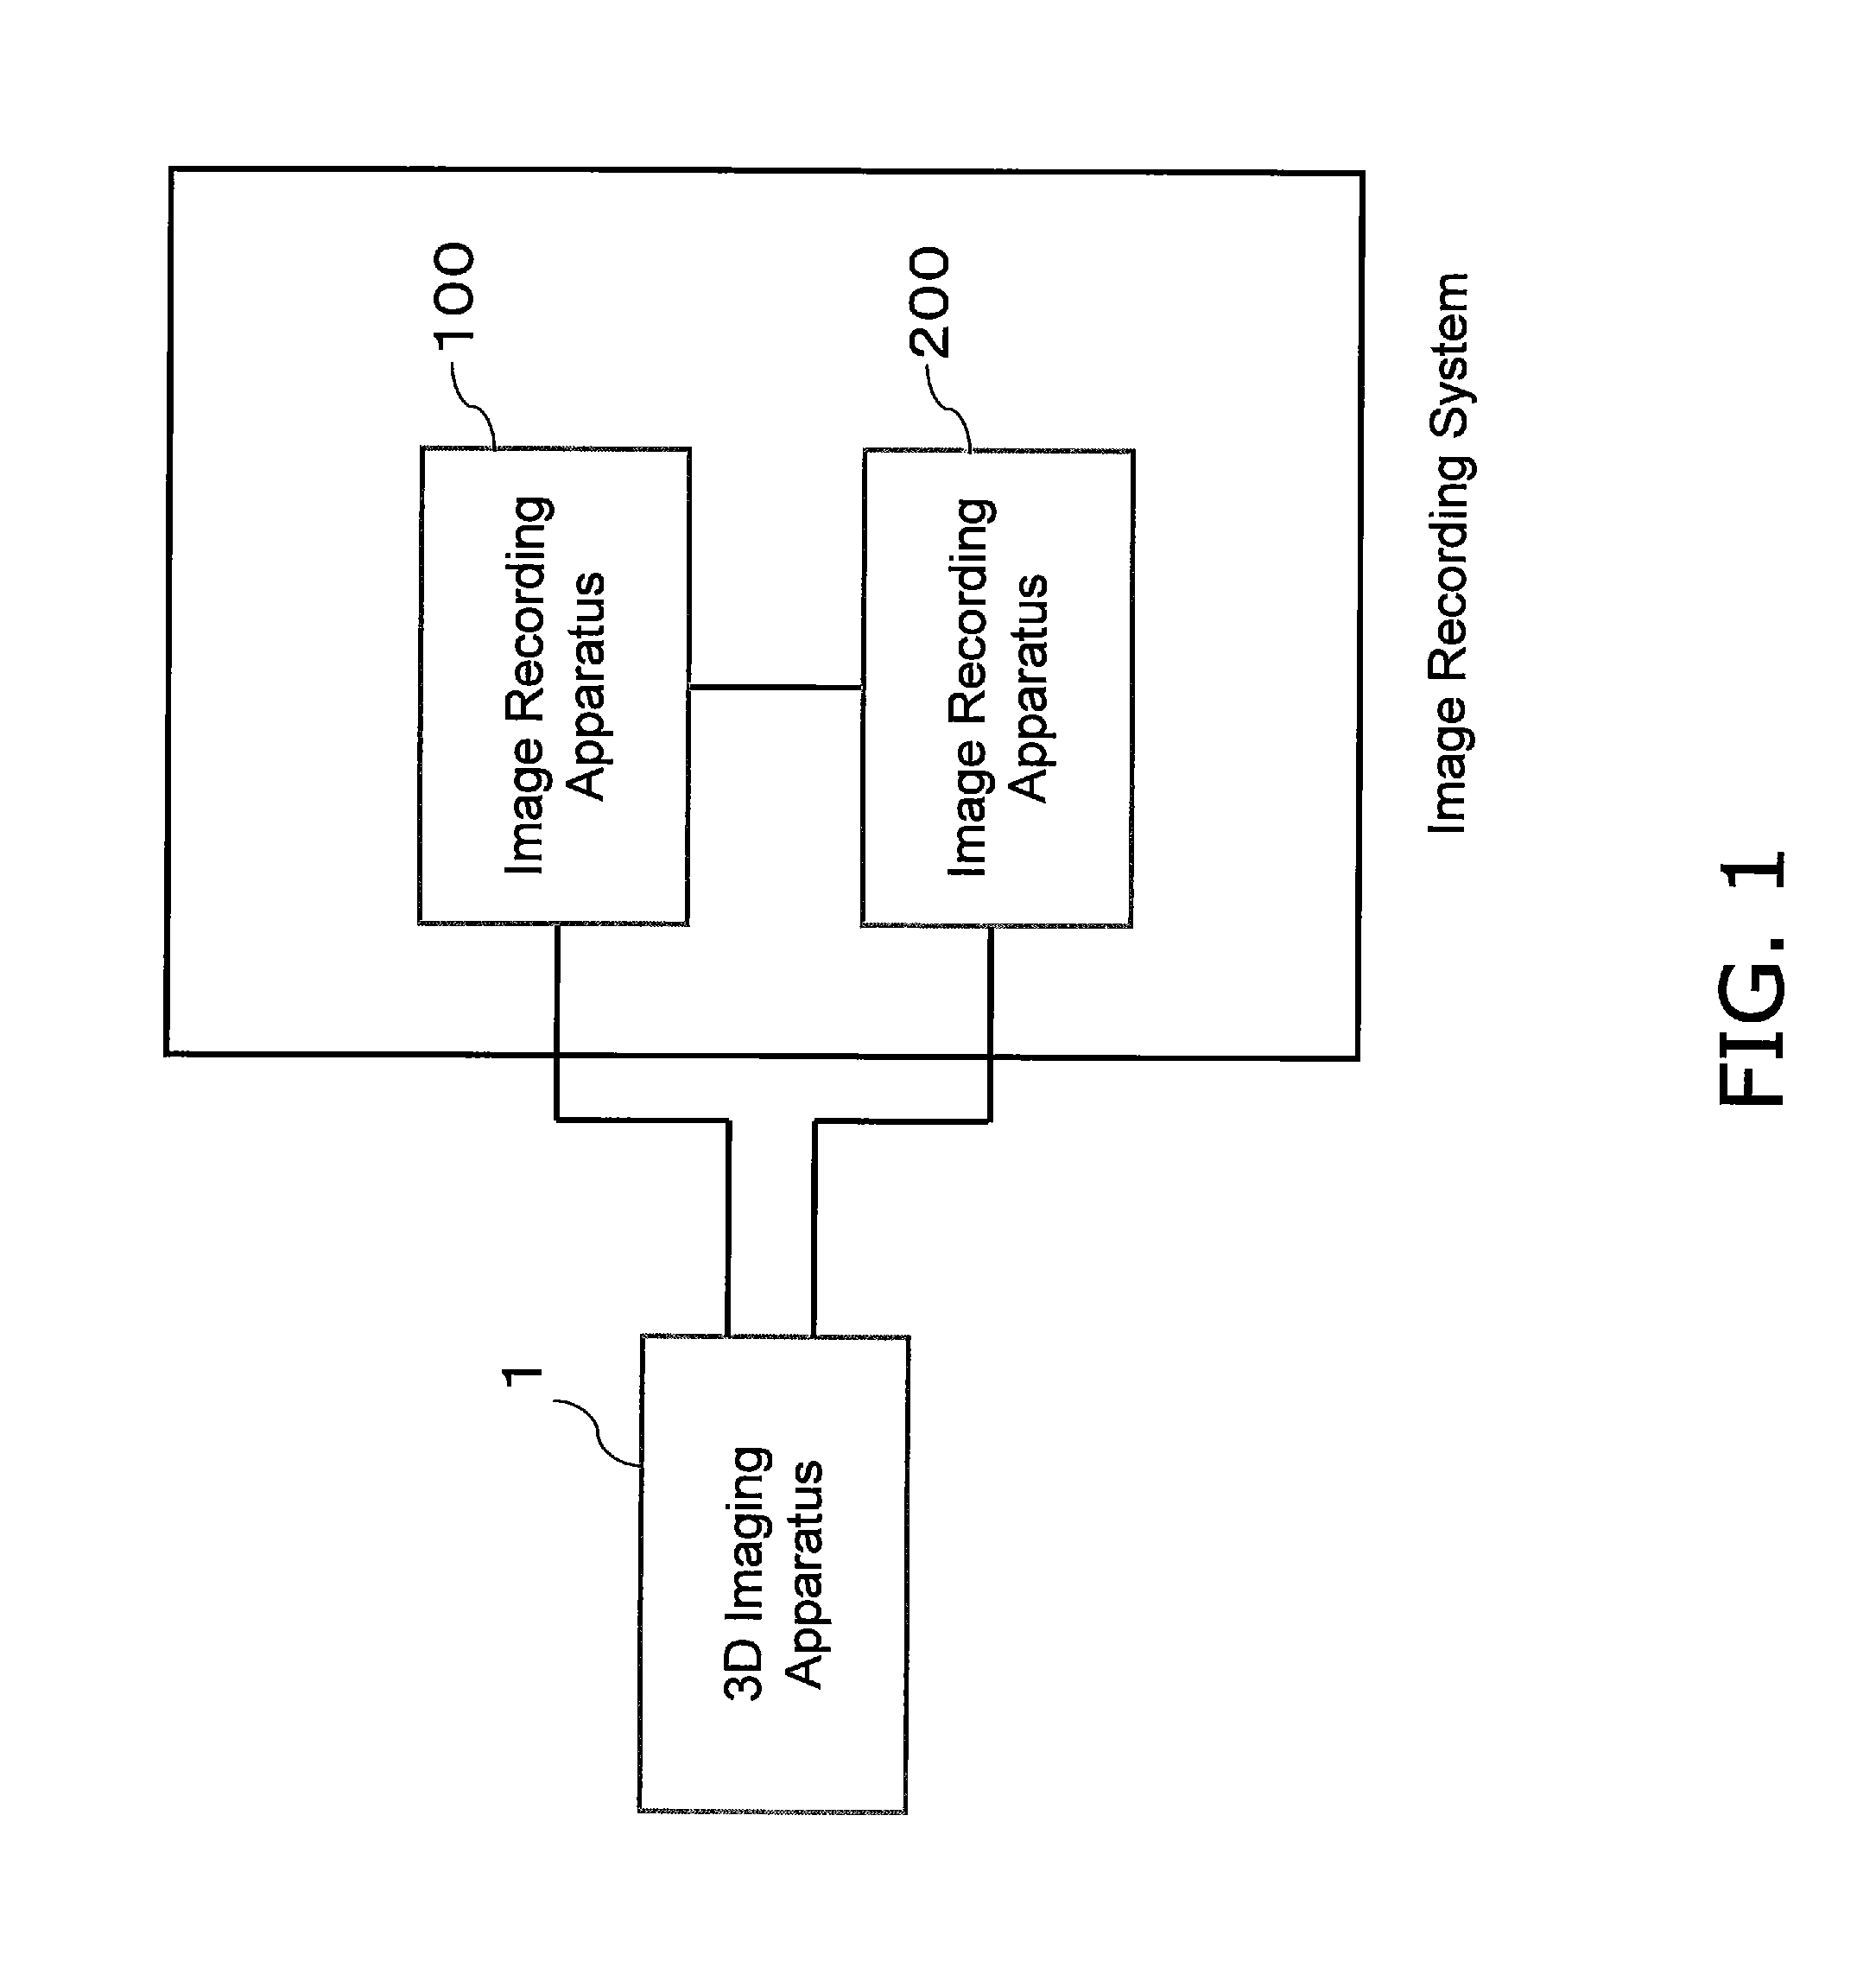 Image recording system, image recording apparatus, and image recording method